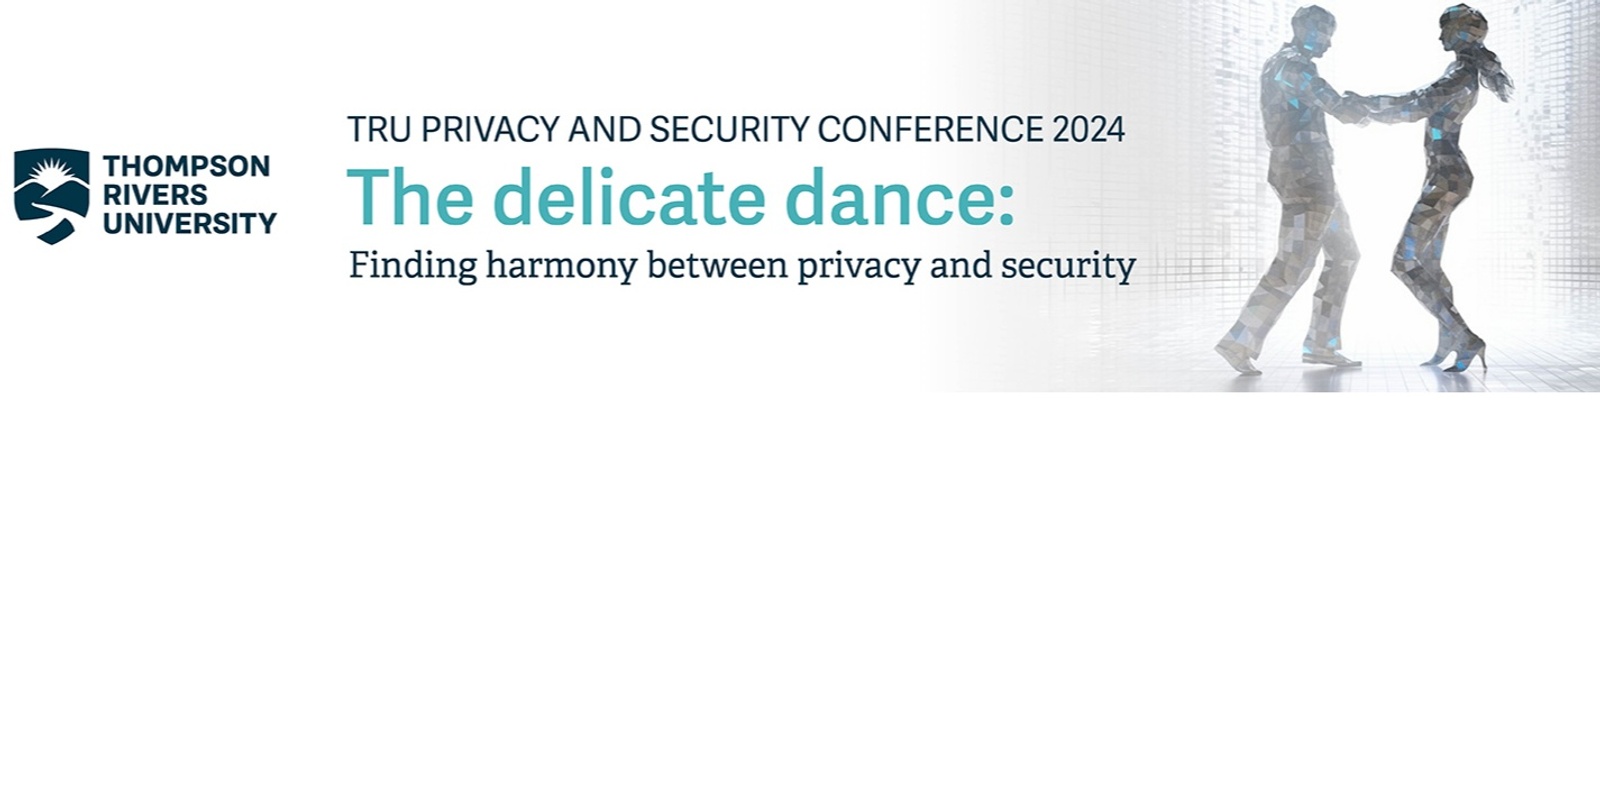 Privacy & Security Conference 2024 Humanitix